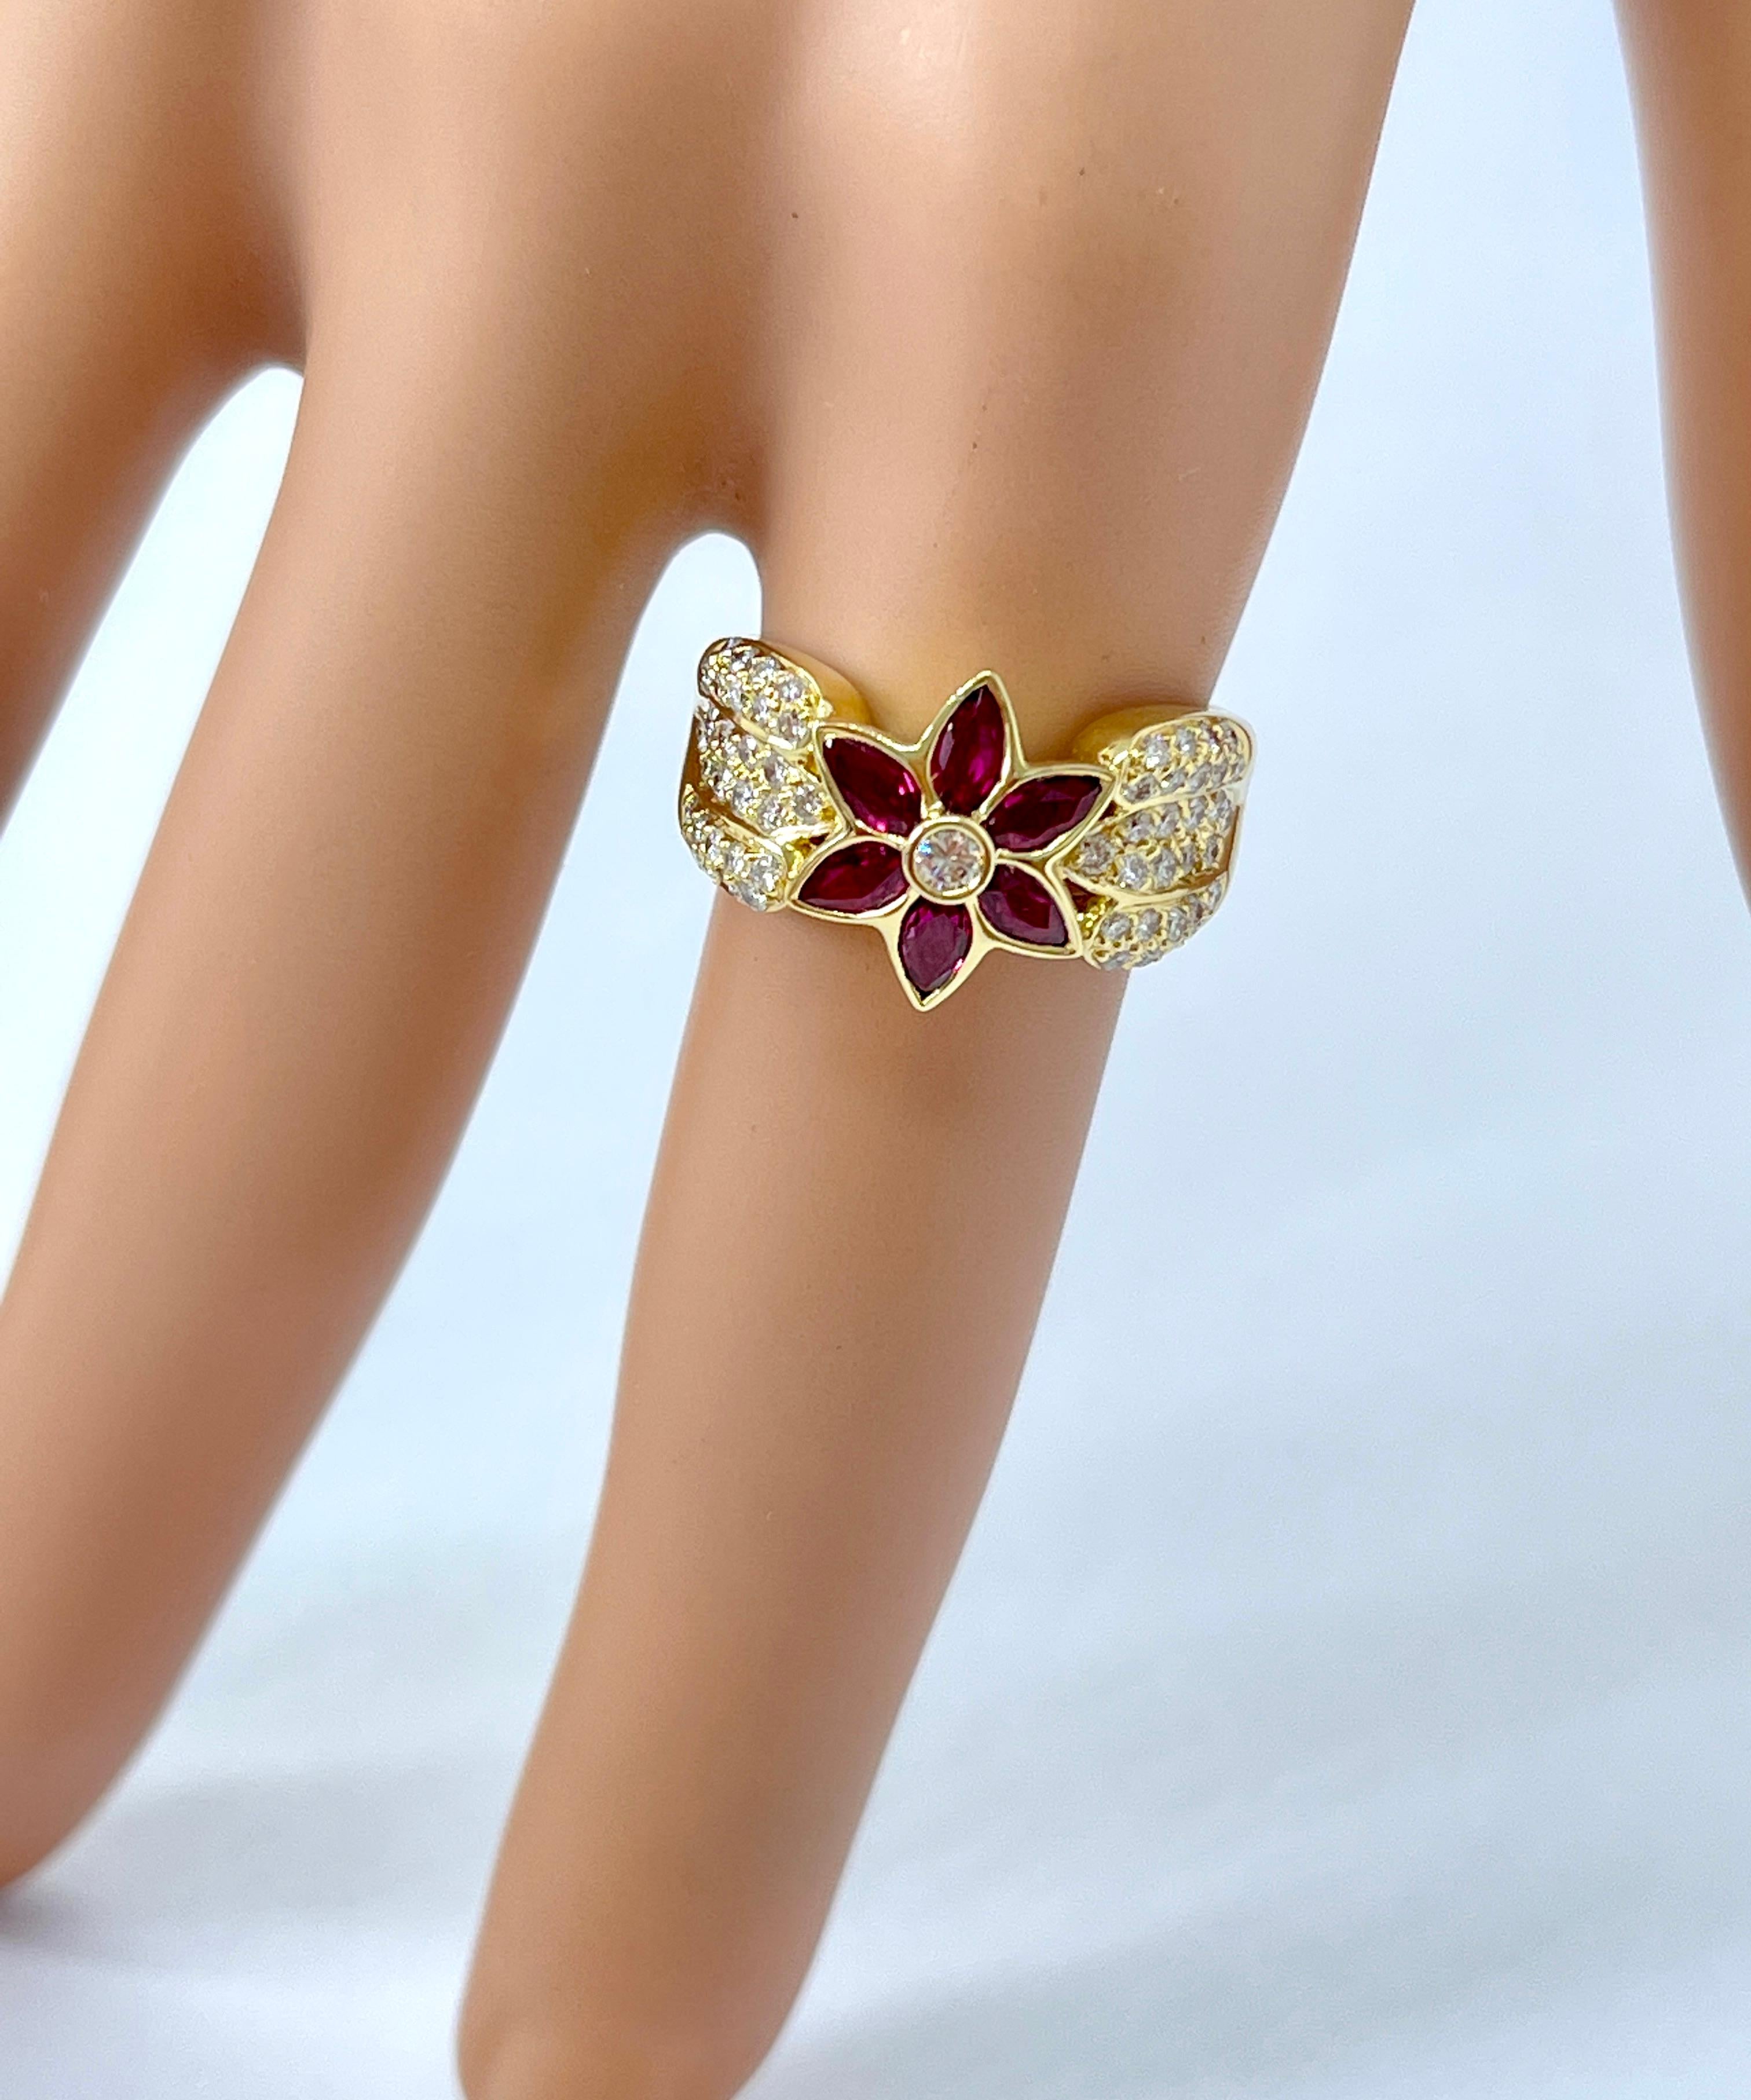 Genuine Natural Ruby Diamond Designer Flower Cluster Ring 18K Yellow Gold In New Condition For Sale In Mona Vale, NSW